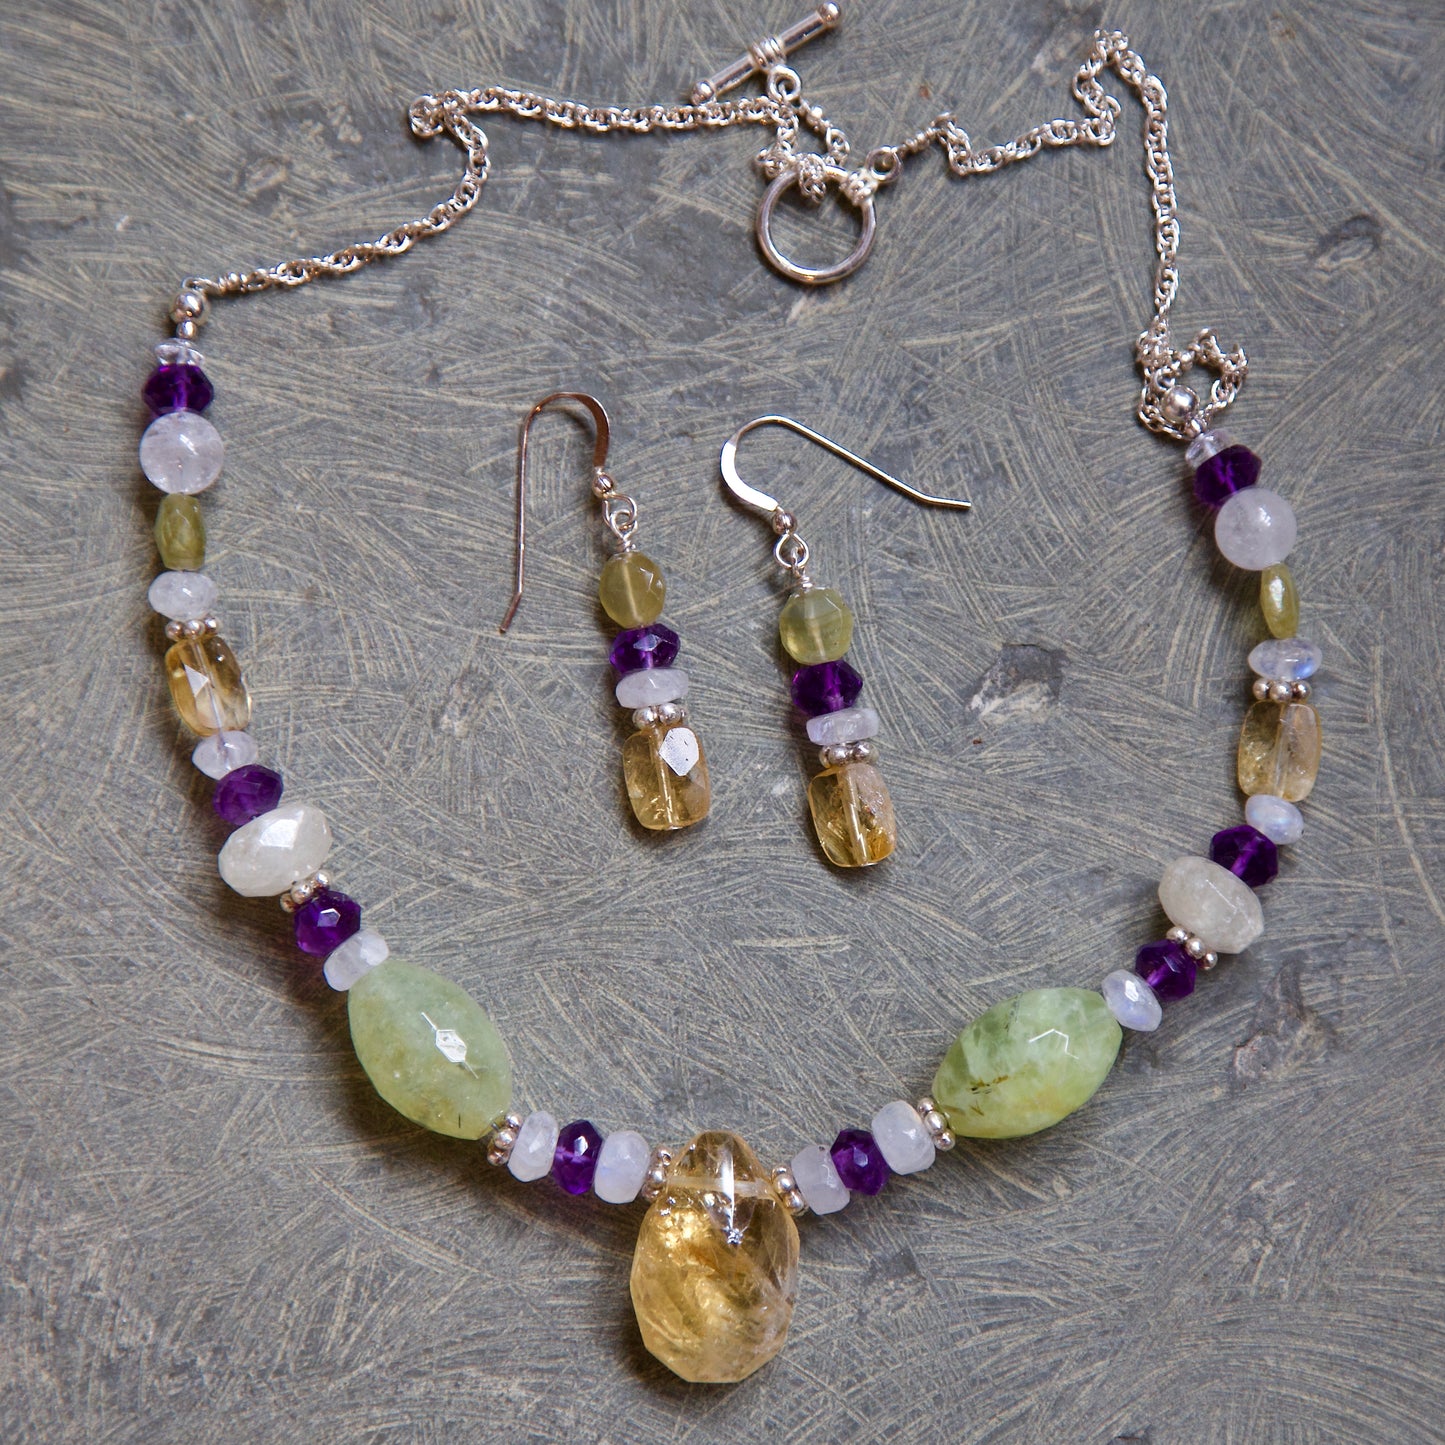 Citrine, Prehnite, Amethyst, Colorless Calcite, Rainbow Moonstone, Clear Quartz, and Sterling Silver Necklace and Earrings Set